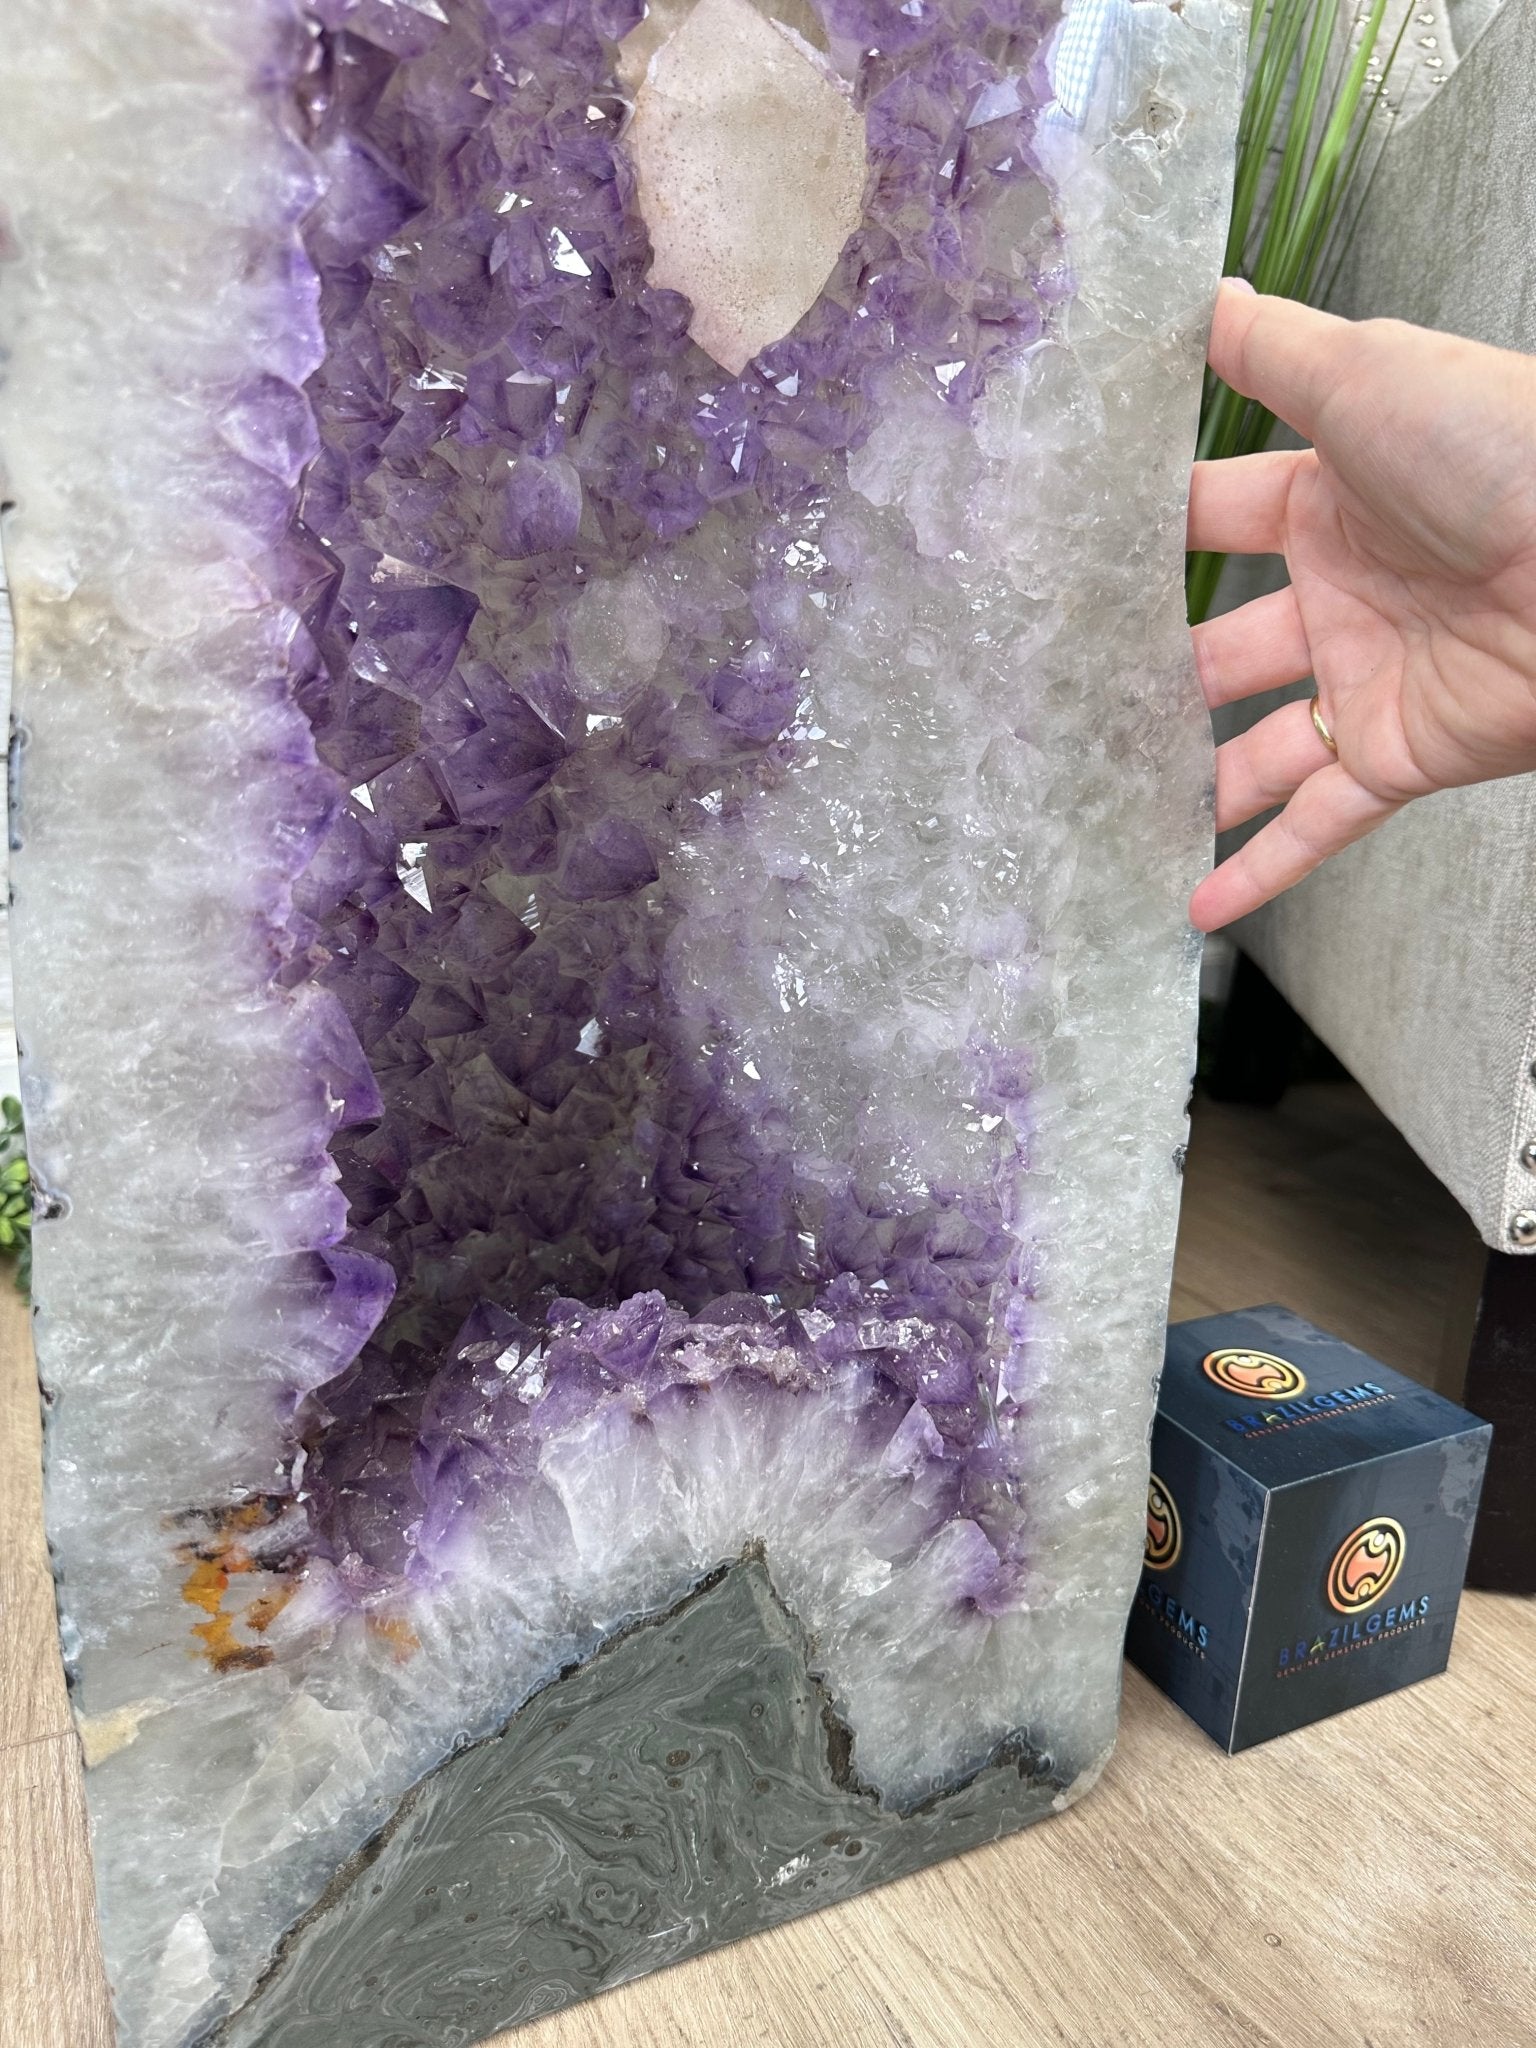 Extra Quality Polished Brazilian Amethyst Cathedral, 119.5 lbs & 34.75" tall Model #5602-0200 by Brazil Gems - Brazil GemsBrazil GemsExtra Quality Polished Brazilian Amethyst Cathedral, 119.5 lbs & 34.75" tall Model #5602-0200 by Brazil GemsPolished Cathedrals5602-0200